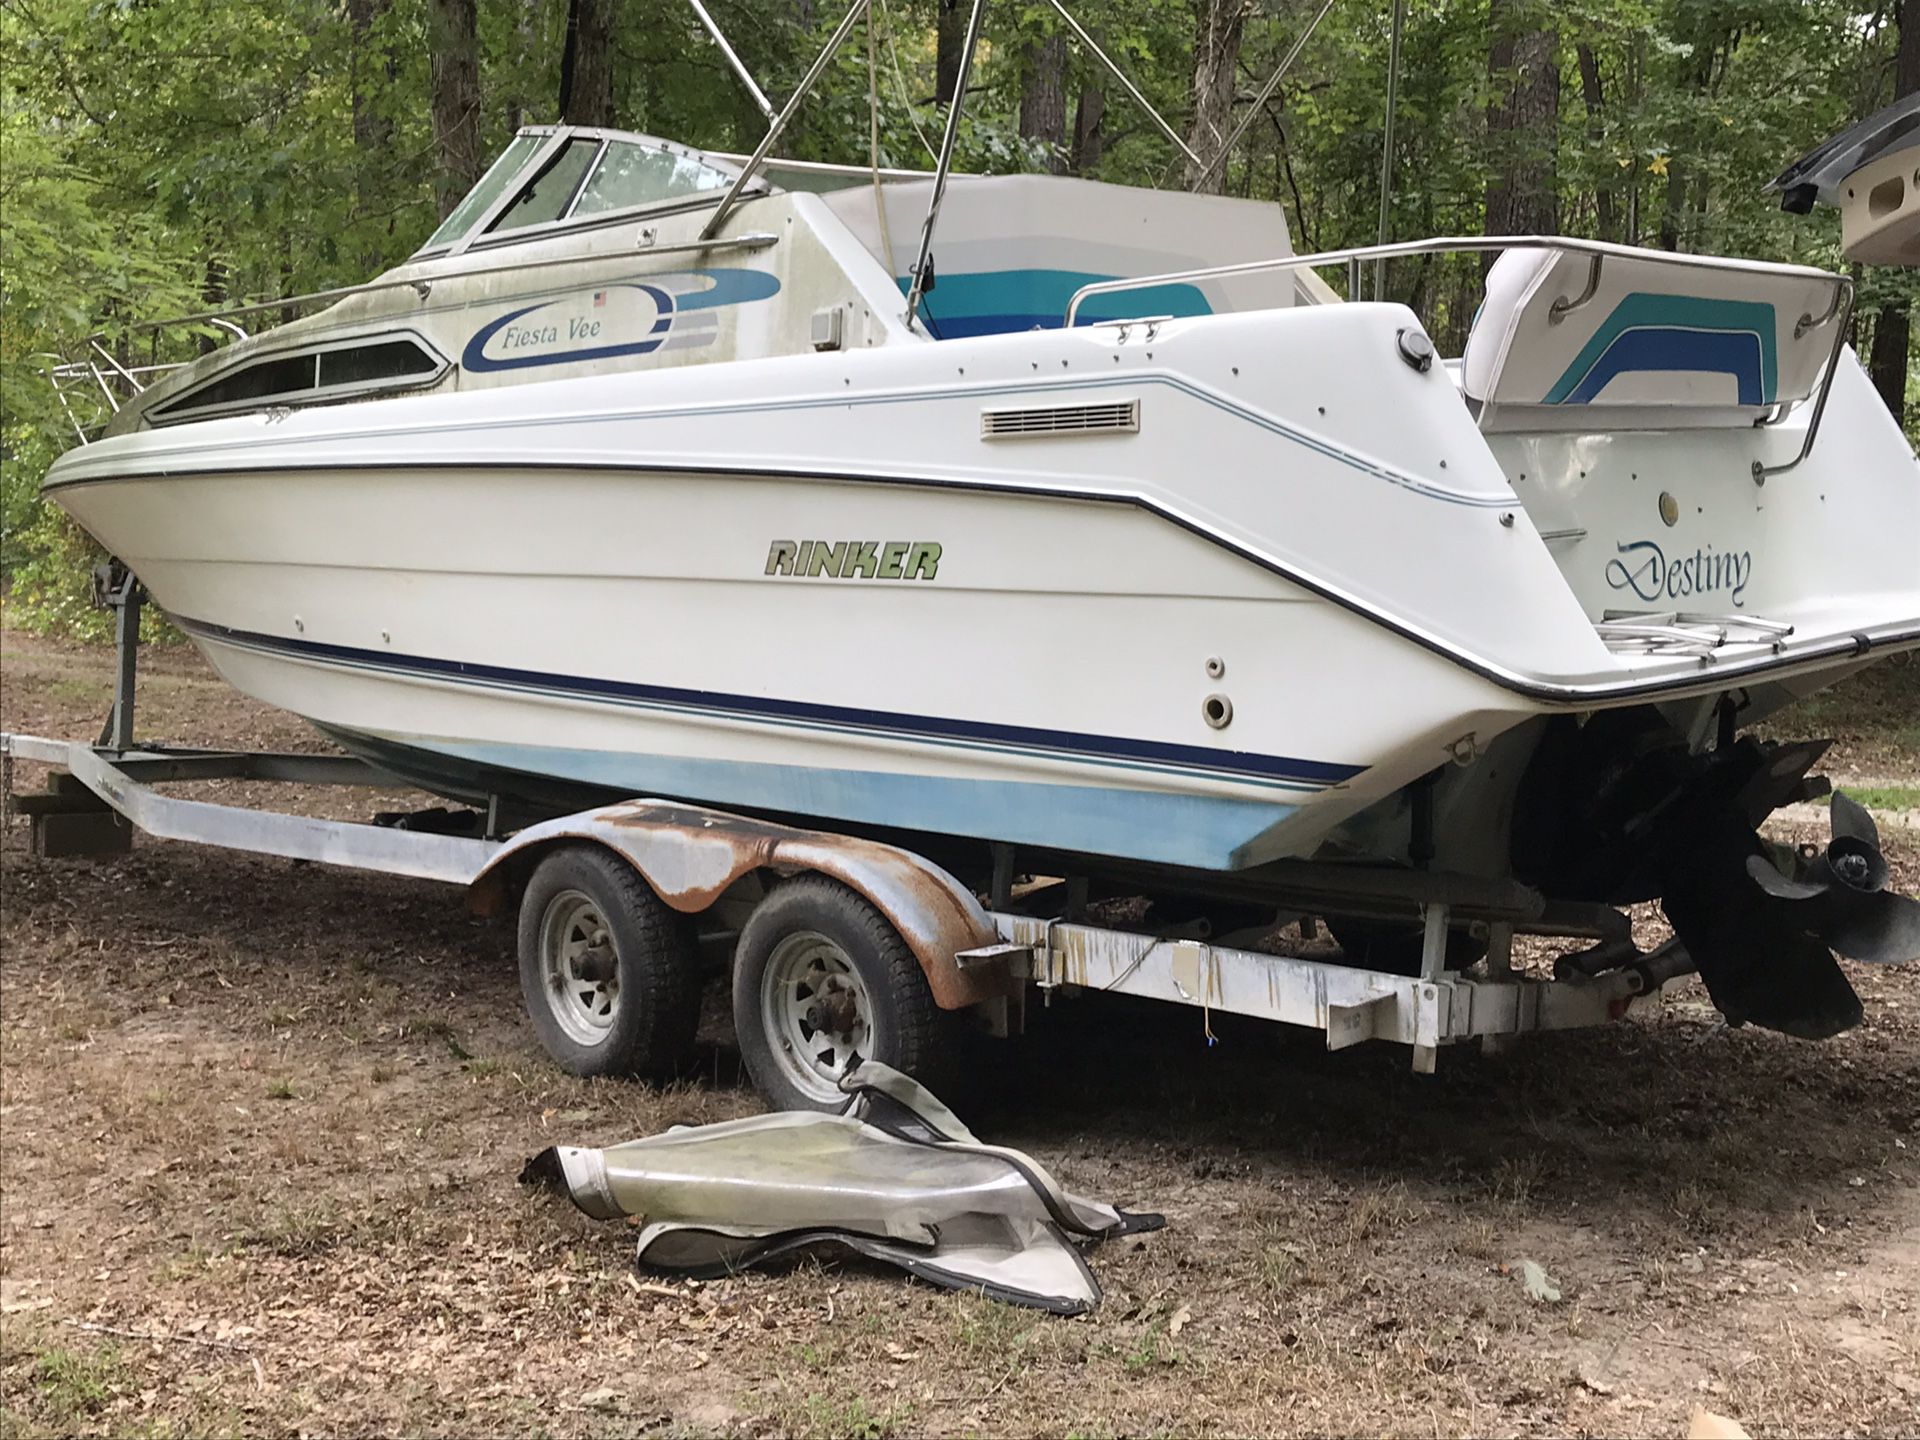 1994 Rinker Fiesta Vee 28 foot - aft cabin / enclosed head with shower - has been sitting for a year - trailer needs work